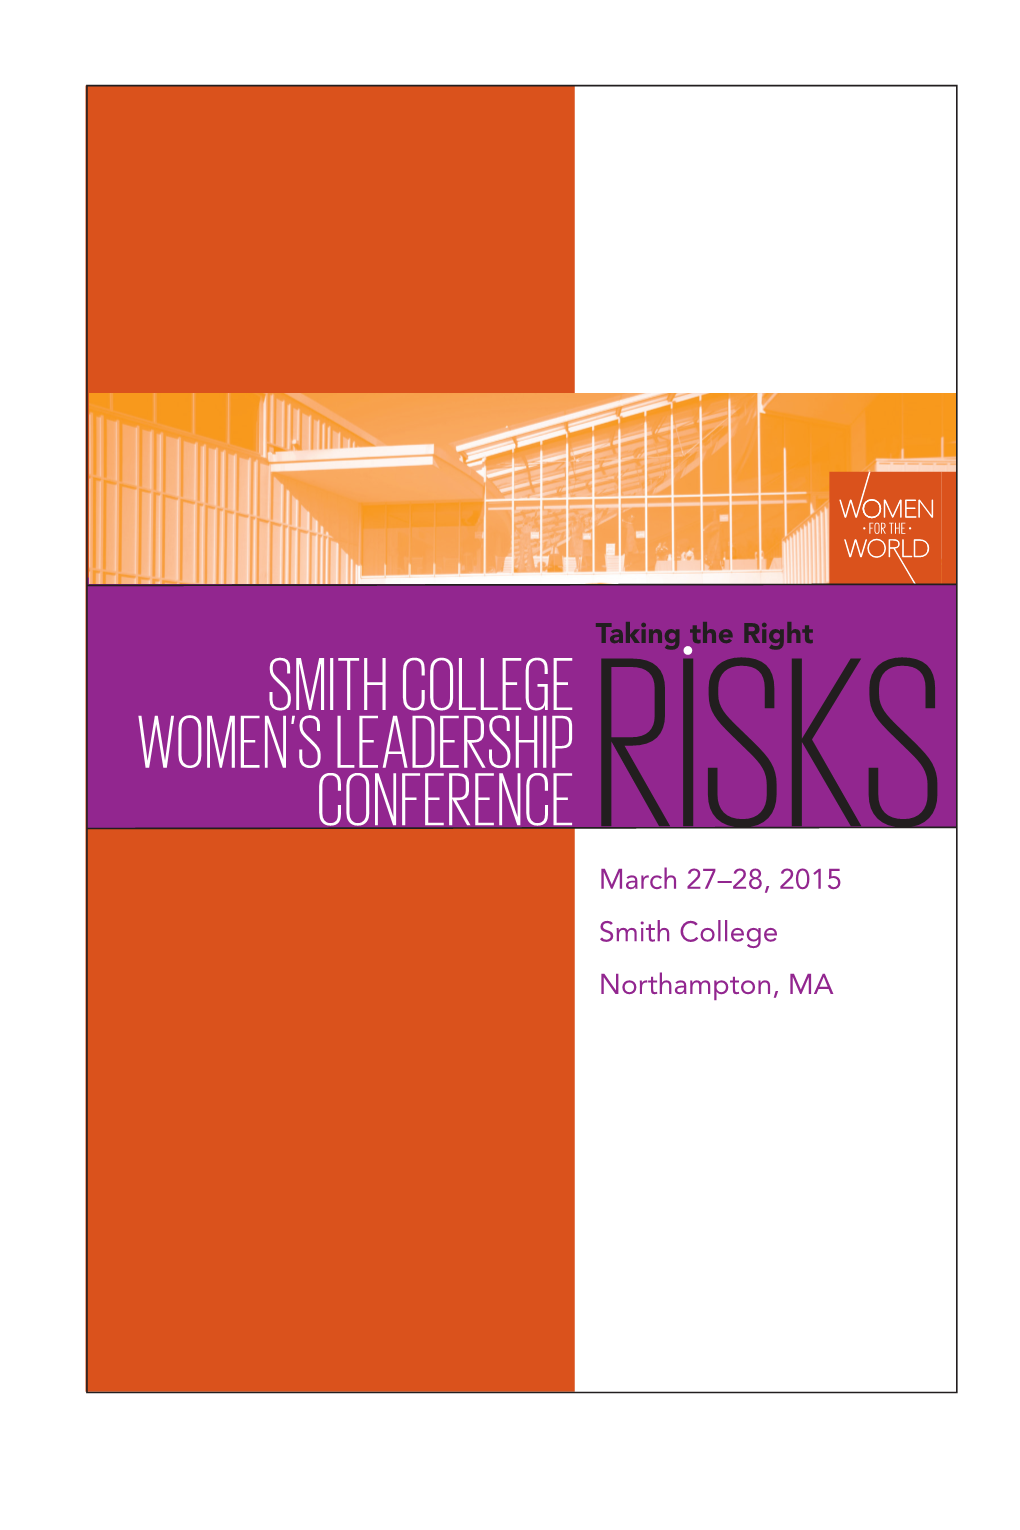 Smith College Women's Leadership Conference